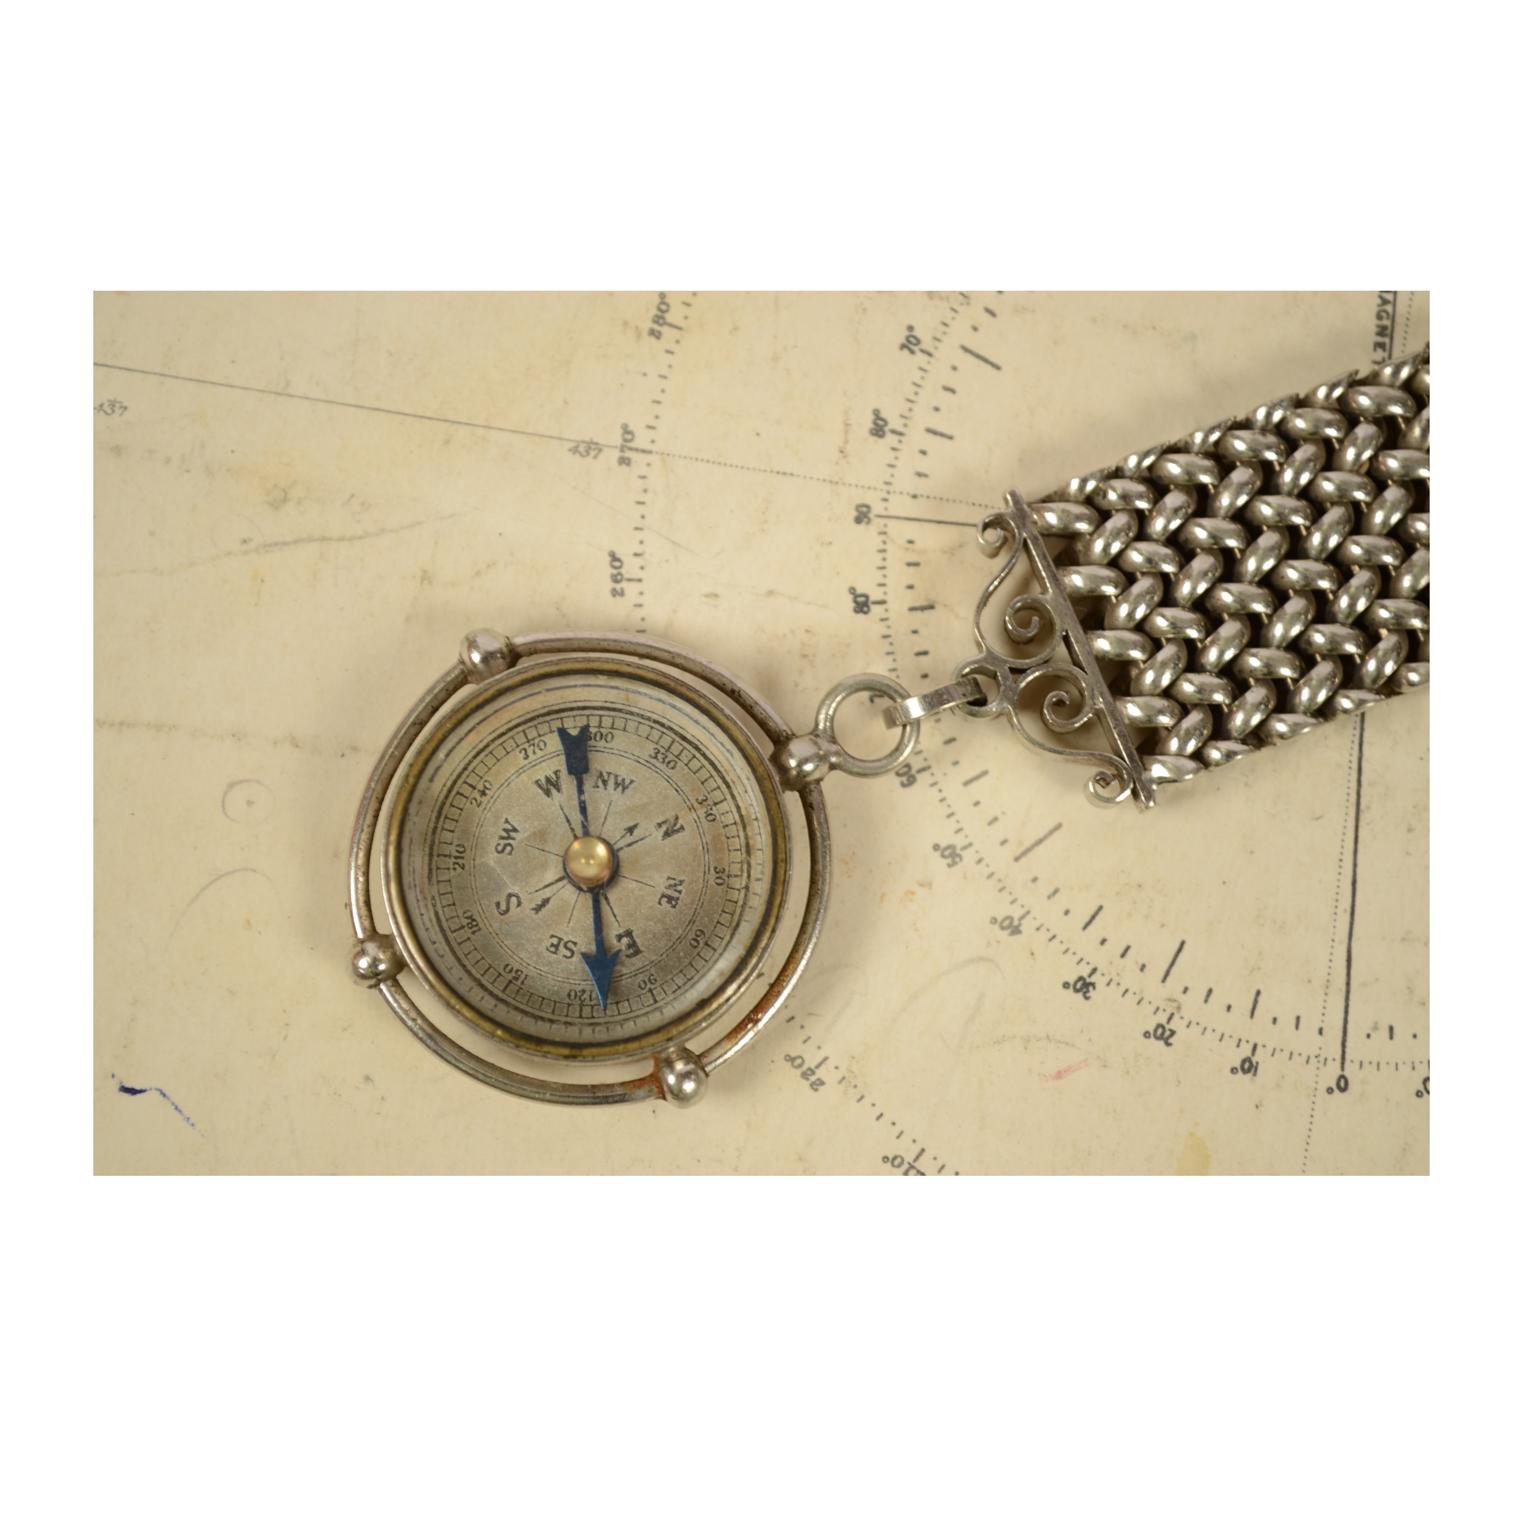 Magnetic chromed brass compass with a wide chain with hook, English manufacture of the early 1900s. Good condition and fully functional. Length 17 cm - 6.69 inches, diameter 4.5 cm - 1.77 inches, thickness cm 1 - inches 0.39.